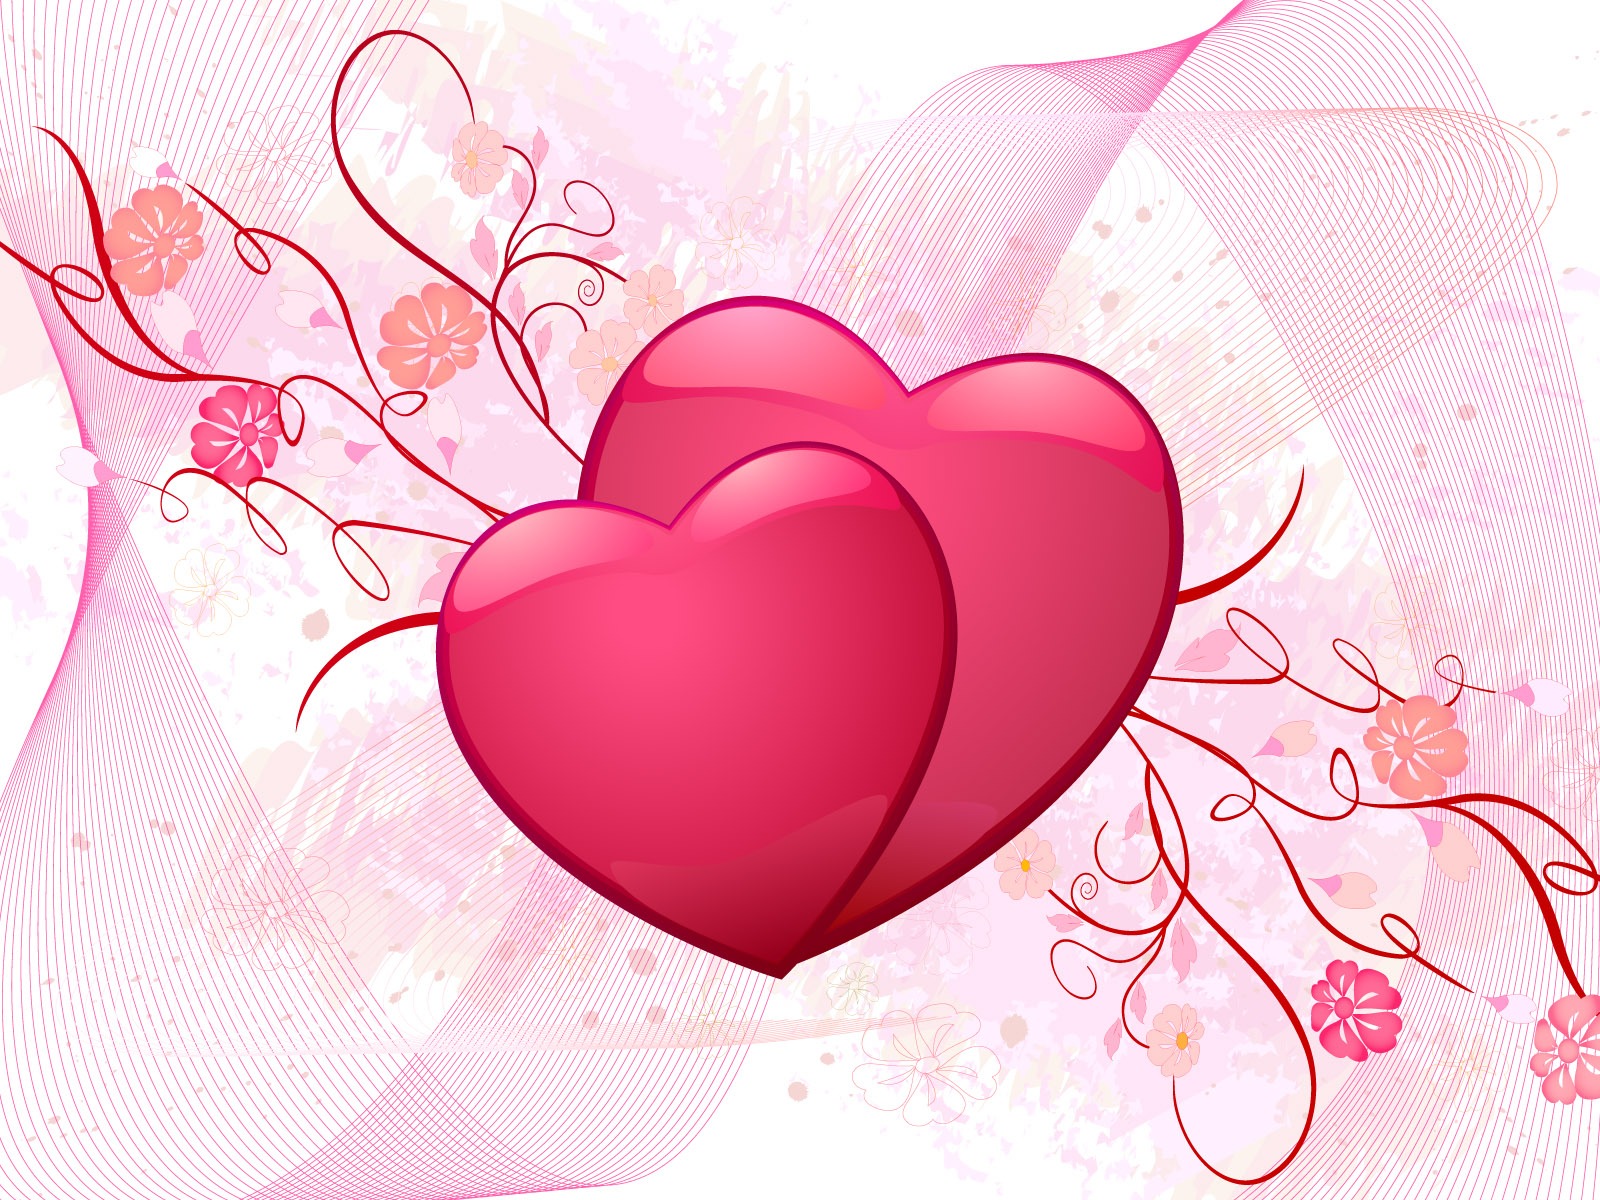 Valentine's Day Love Theme Wallpapers #24 - 1600x1200